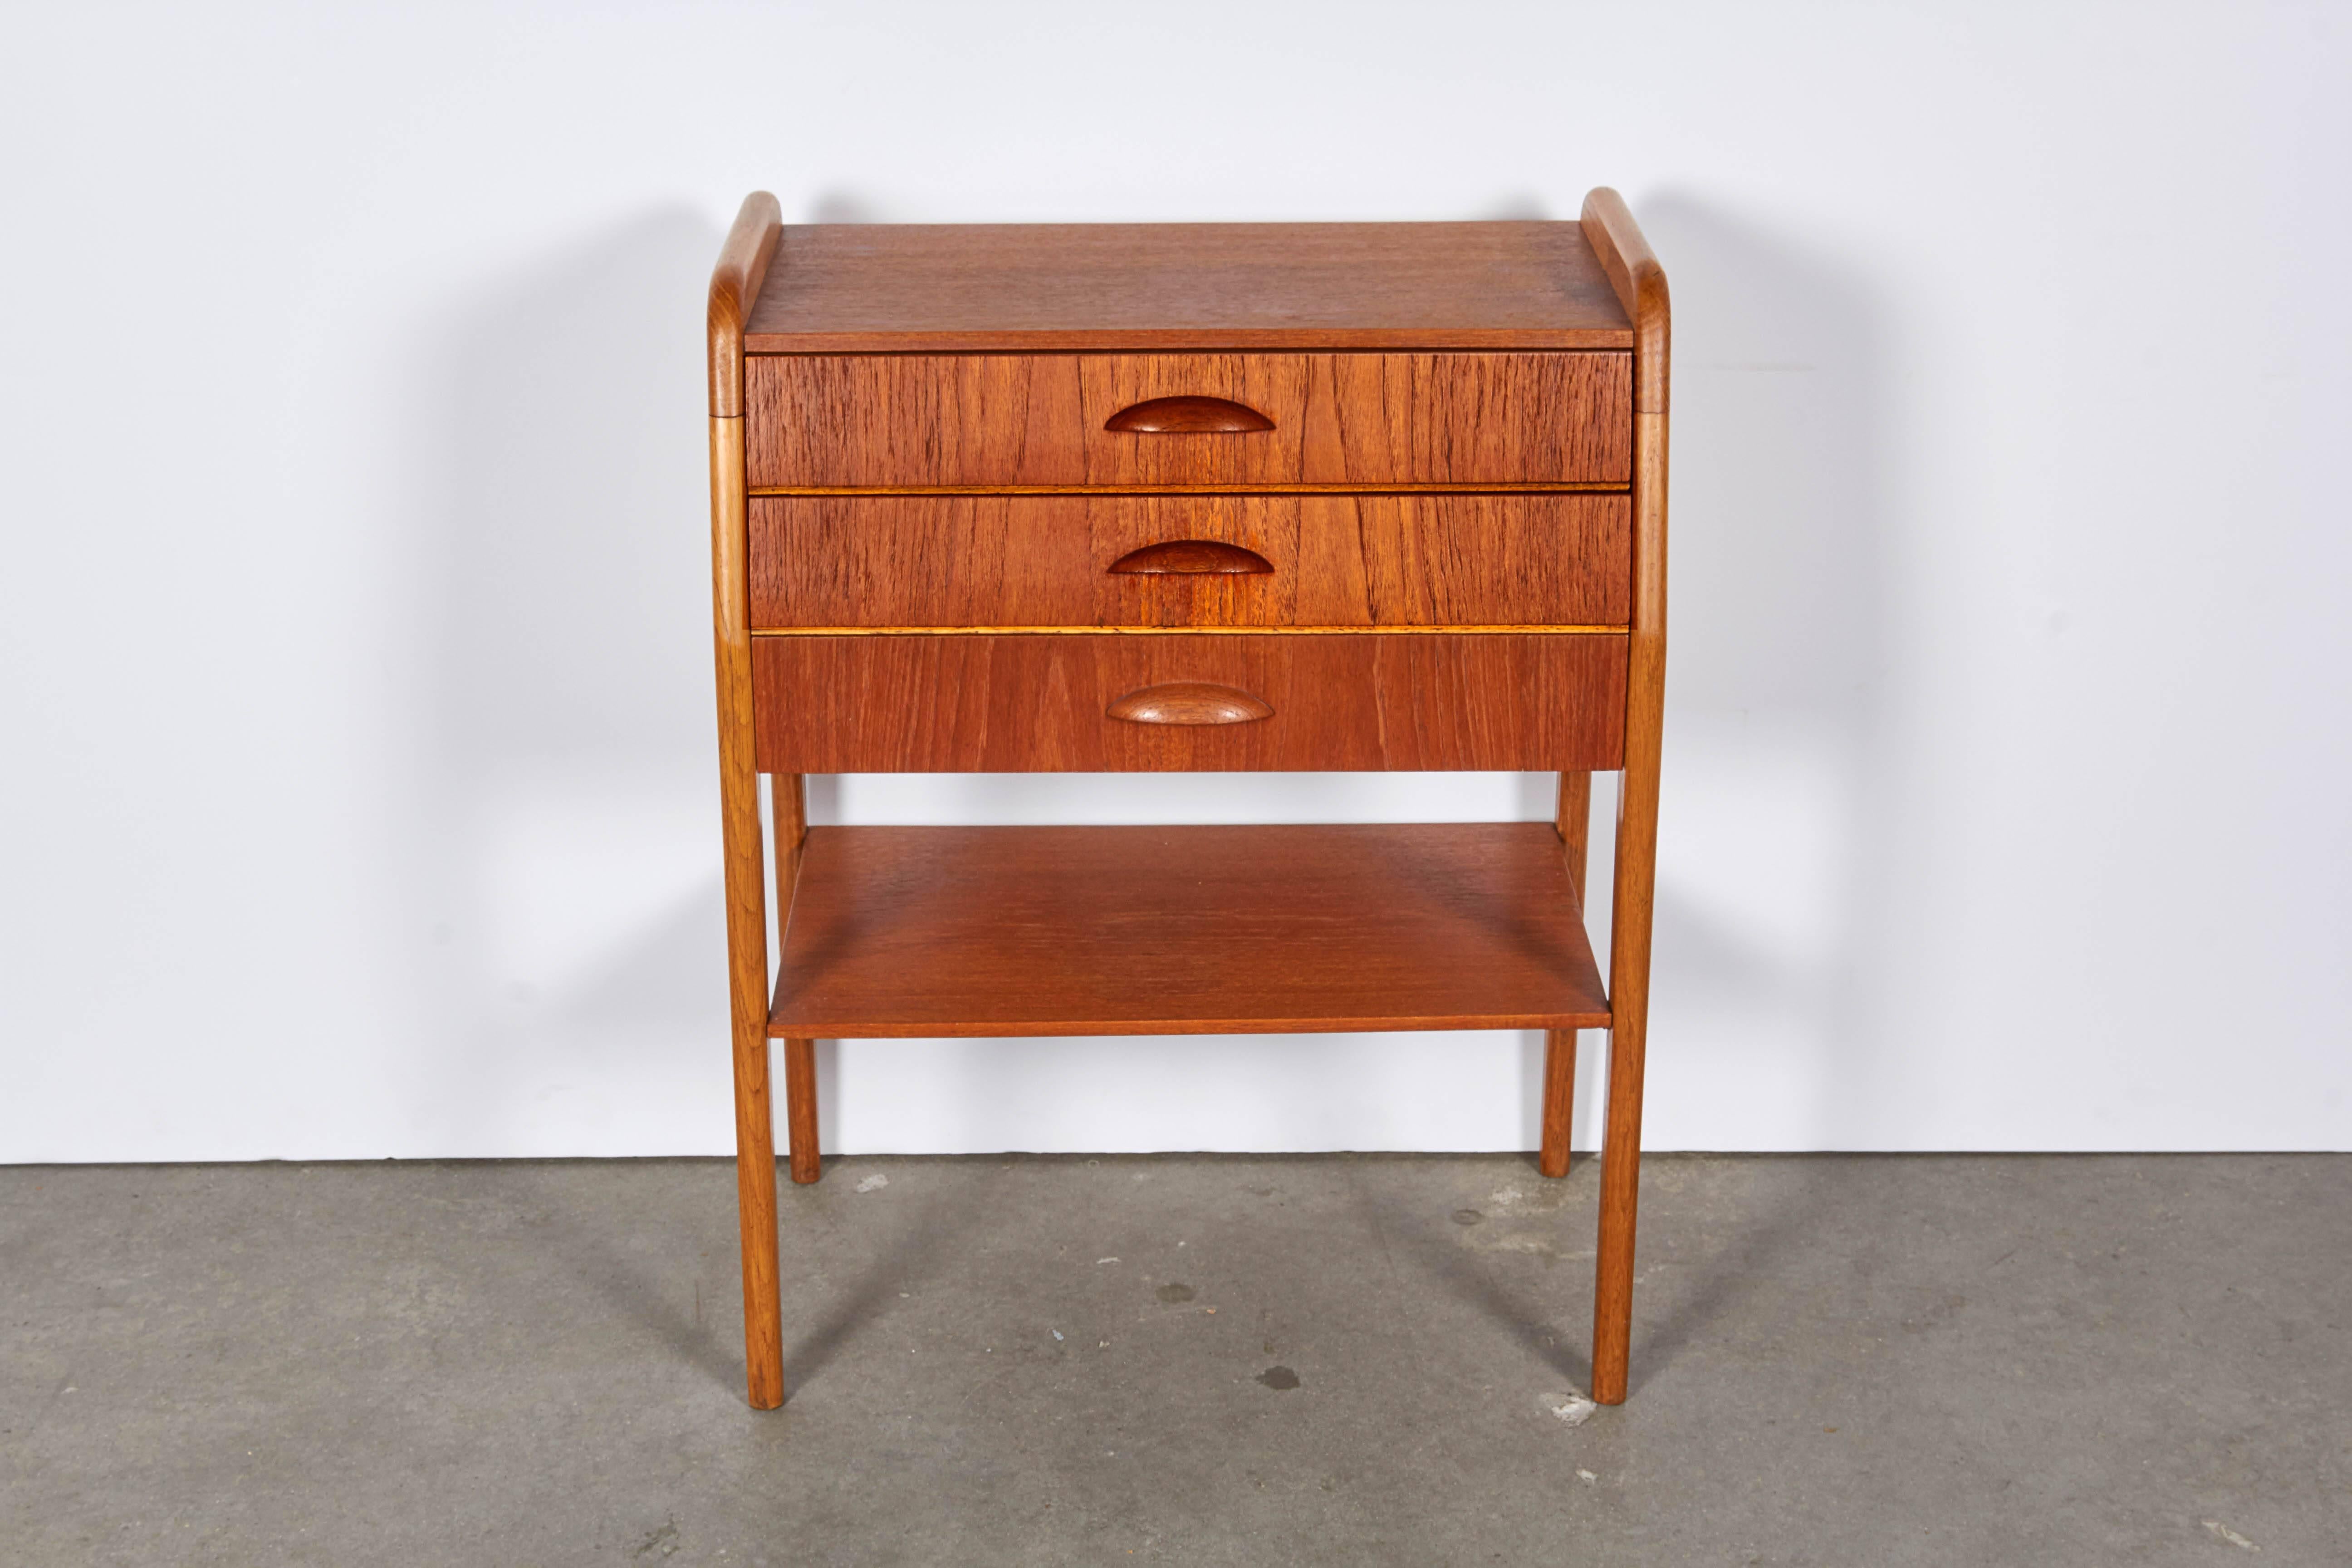 Vintage 1950s Poul Volther Teak End Table

This mid century bedside table is in excellent condition. Of course great in a bedroom but also fantastic as an end table in the living room. Ready for pick up, delivery, or shipping anywhere in the world.